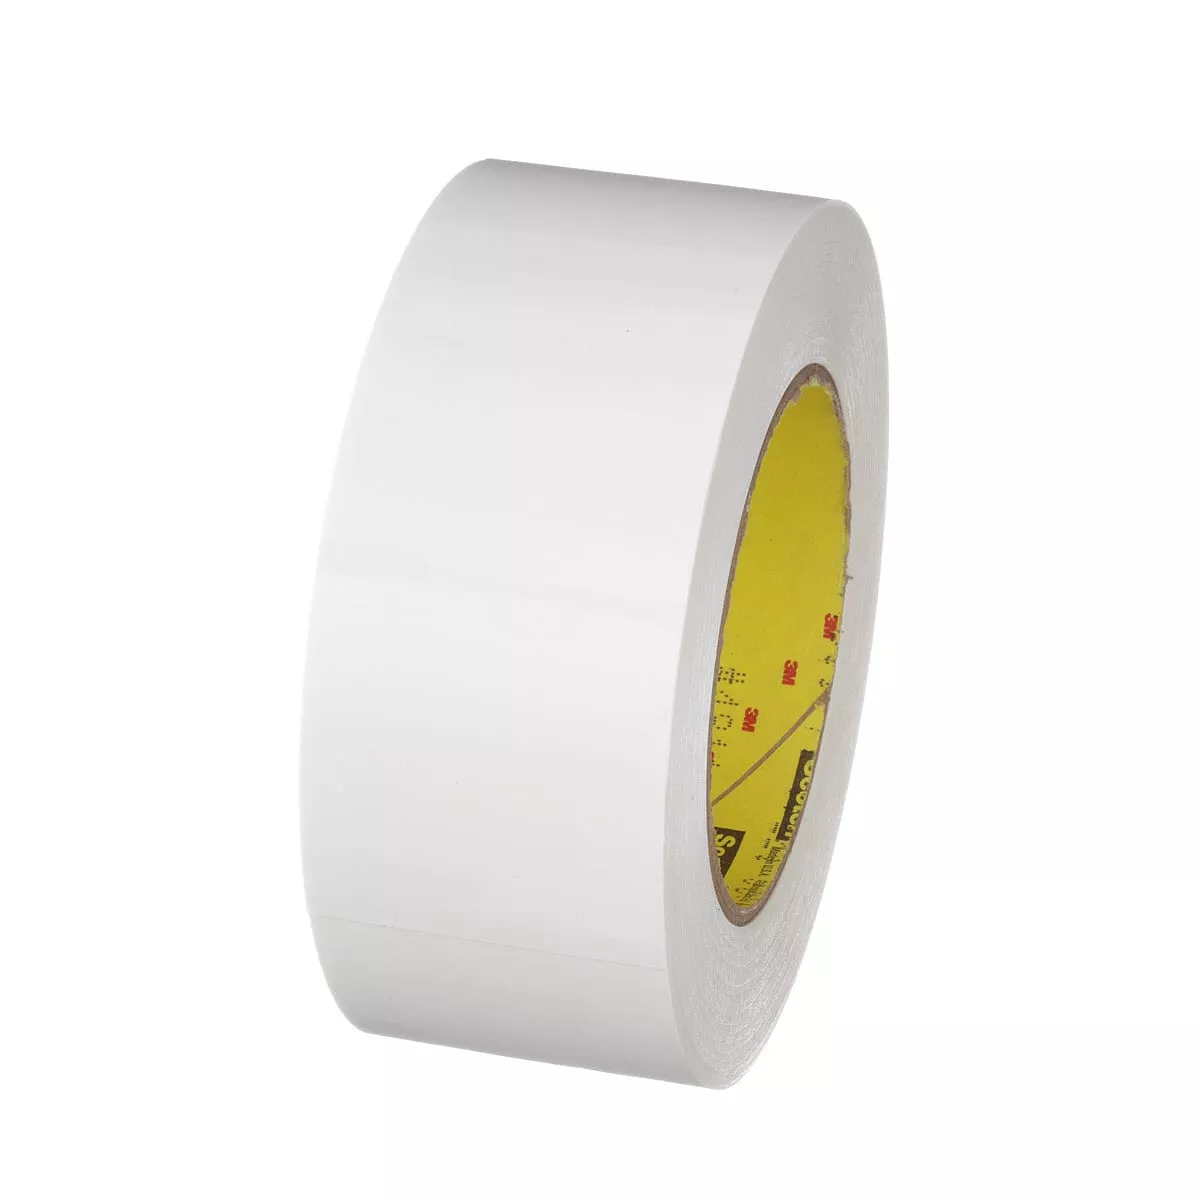 3M™ Preservation Sealing Tape 4811, White, 2 in x 36 yd, 9.5 mil, 24
Roll/Case